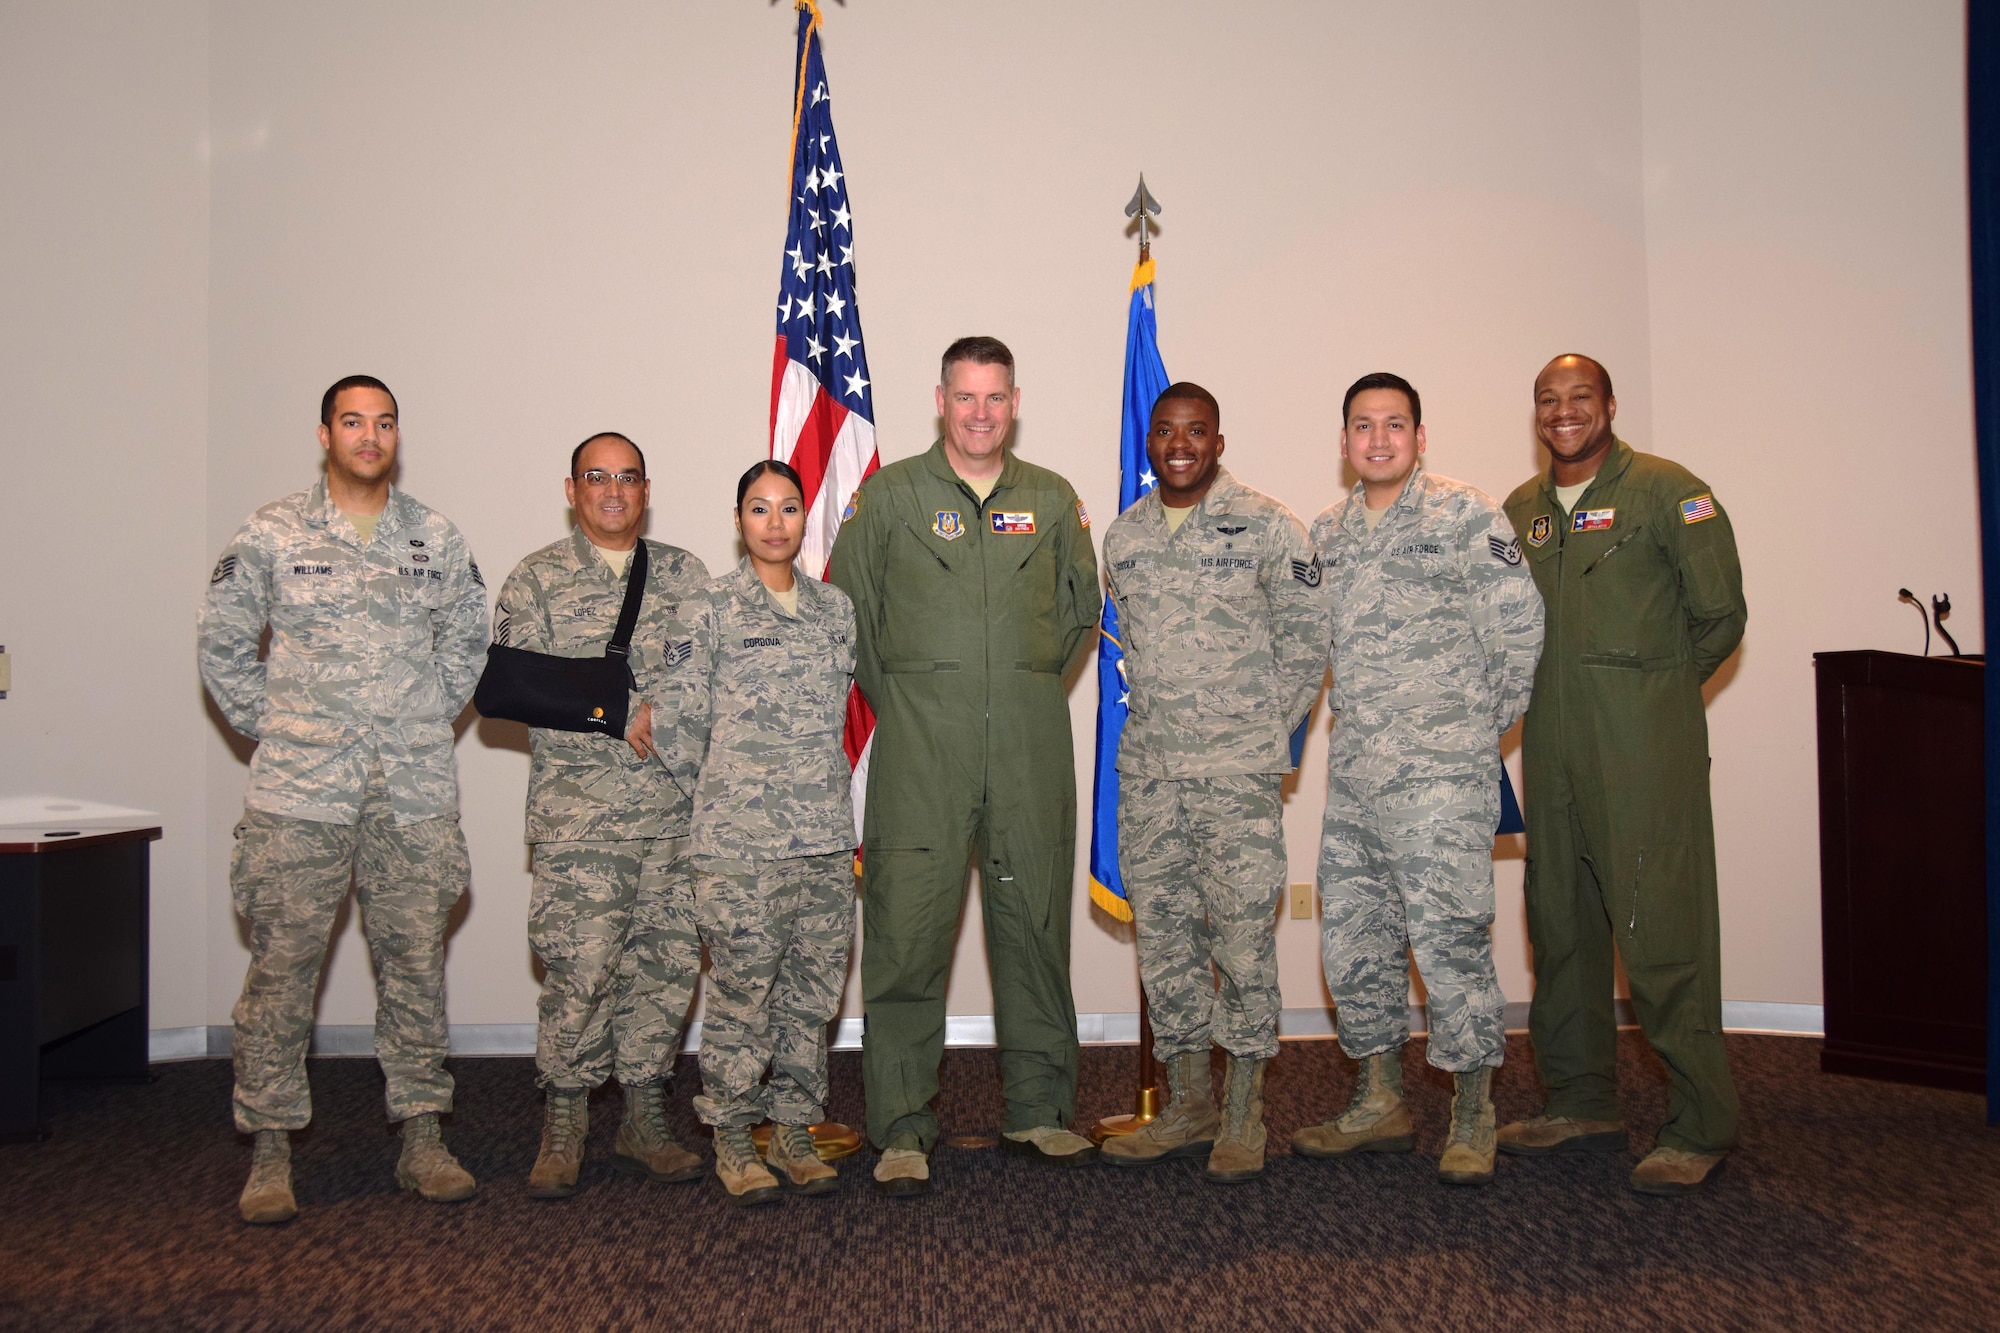 Col. Greg Haynes, center, 433rd Operations Group commander, congratulates Staff Sgt. Jerome Williams, Master Sgt. Jesse Lopez, Staff Sgt. Celina Cordova, Staff Sgt. Shillen Goodlin, Staff Sgt. Oracio Salinas and Master Sgt. Bryan Boyd, after they are presented their Community College of the Air Force degrees Nov. 5, 2016 in a ceremony held at the Inter American Air Forces Academy at Joint Base San Antonio, Lackland, Texas. (U.S. Air Force photo by Tech. Sgt. Carlos J. Treviño) 